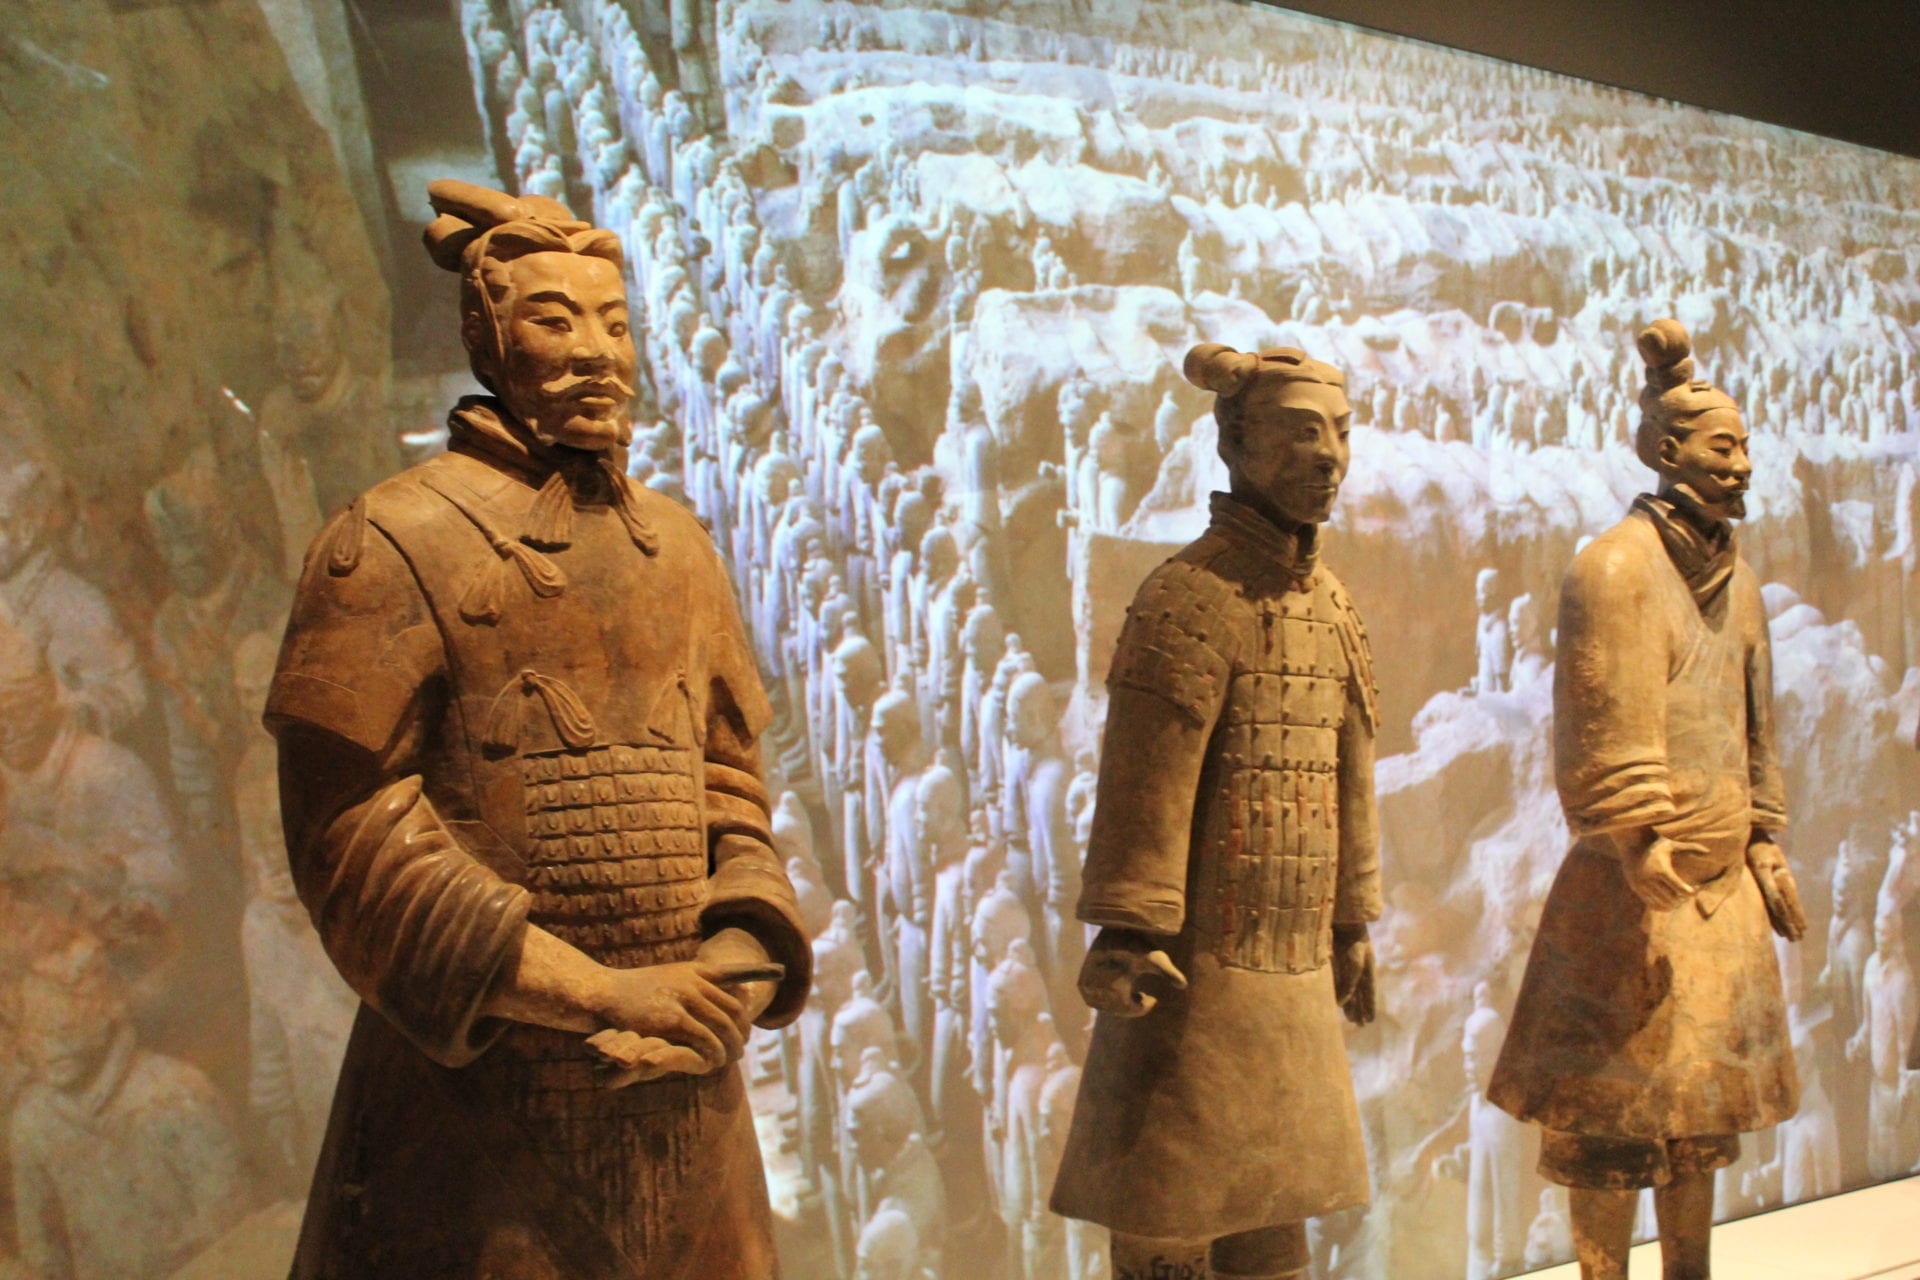 Get a first look inside the Terracotta Warriors Exhibition at World